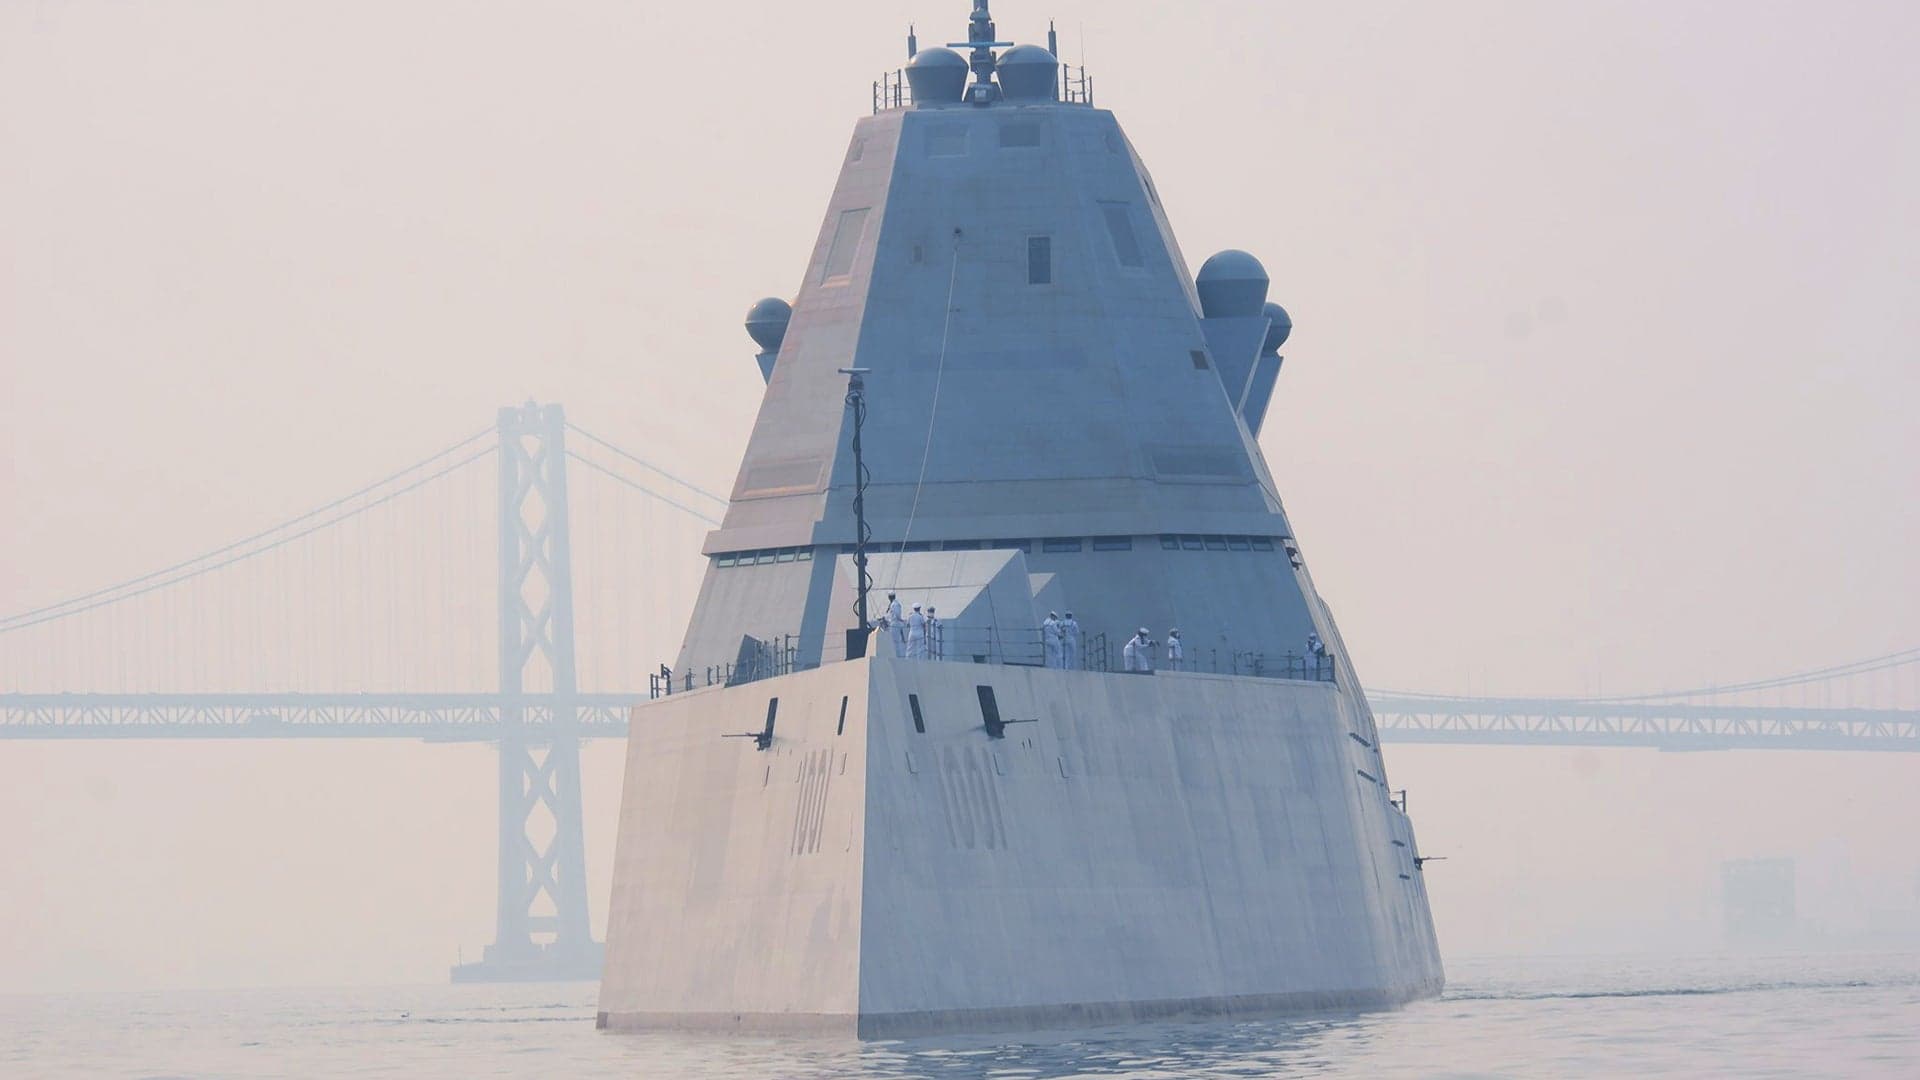 Navy’s Troubled Stealth Destroyers May Have Radars Replaced Before Ever Sailing On A Mission